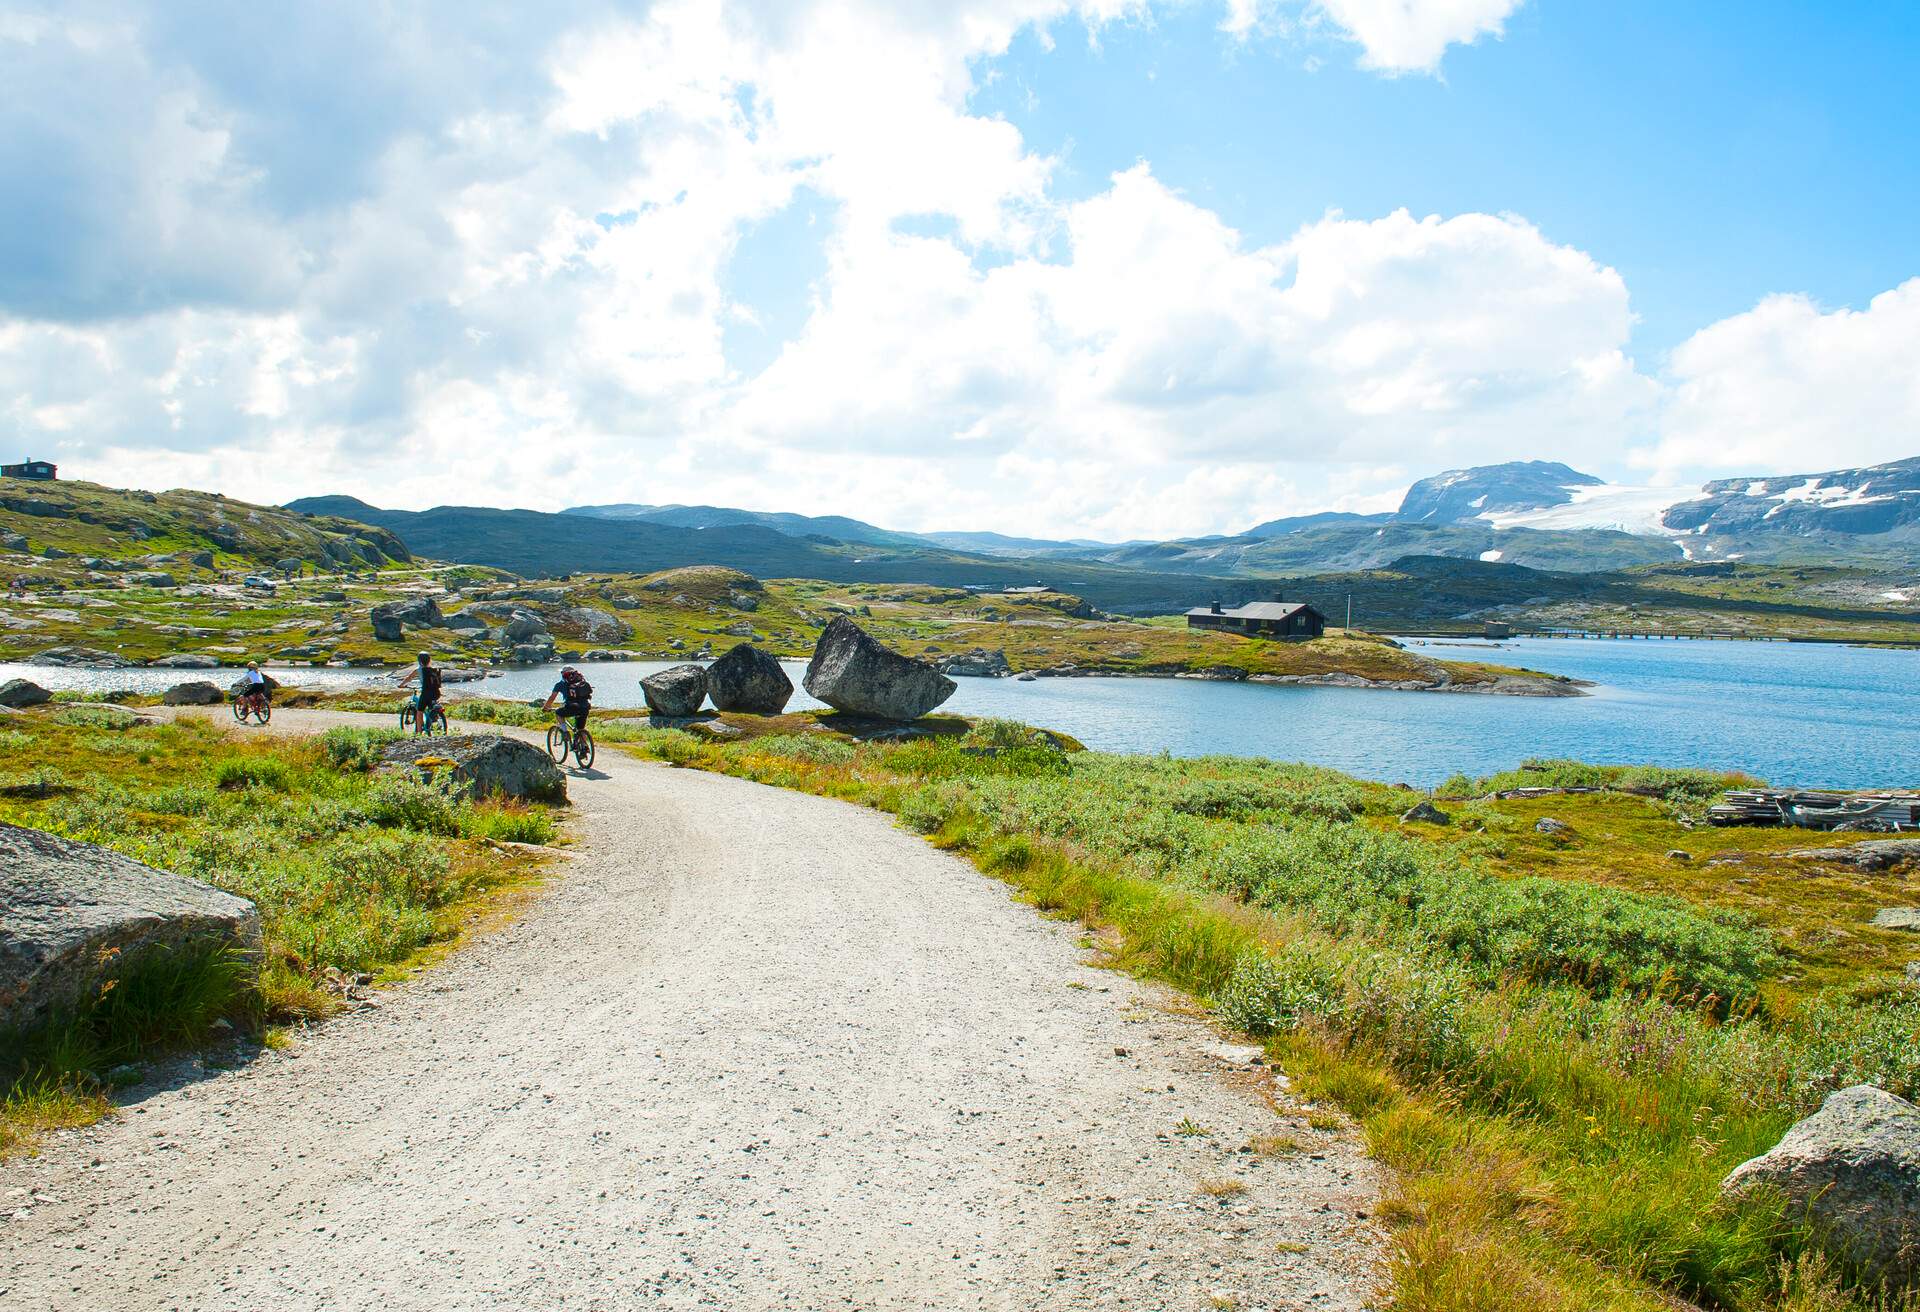 Tourists biking and beautiful landscape in Finse, Norway, on July 28 2019